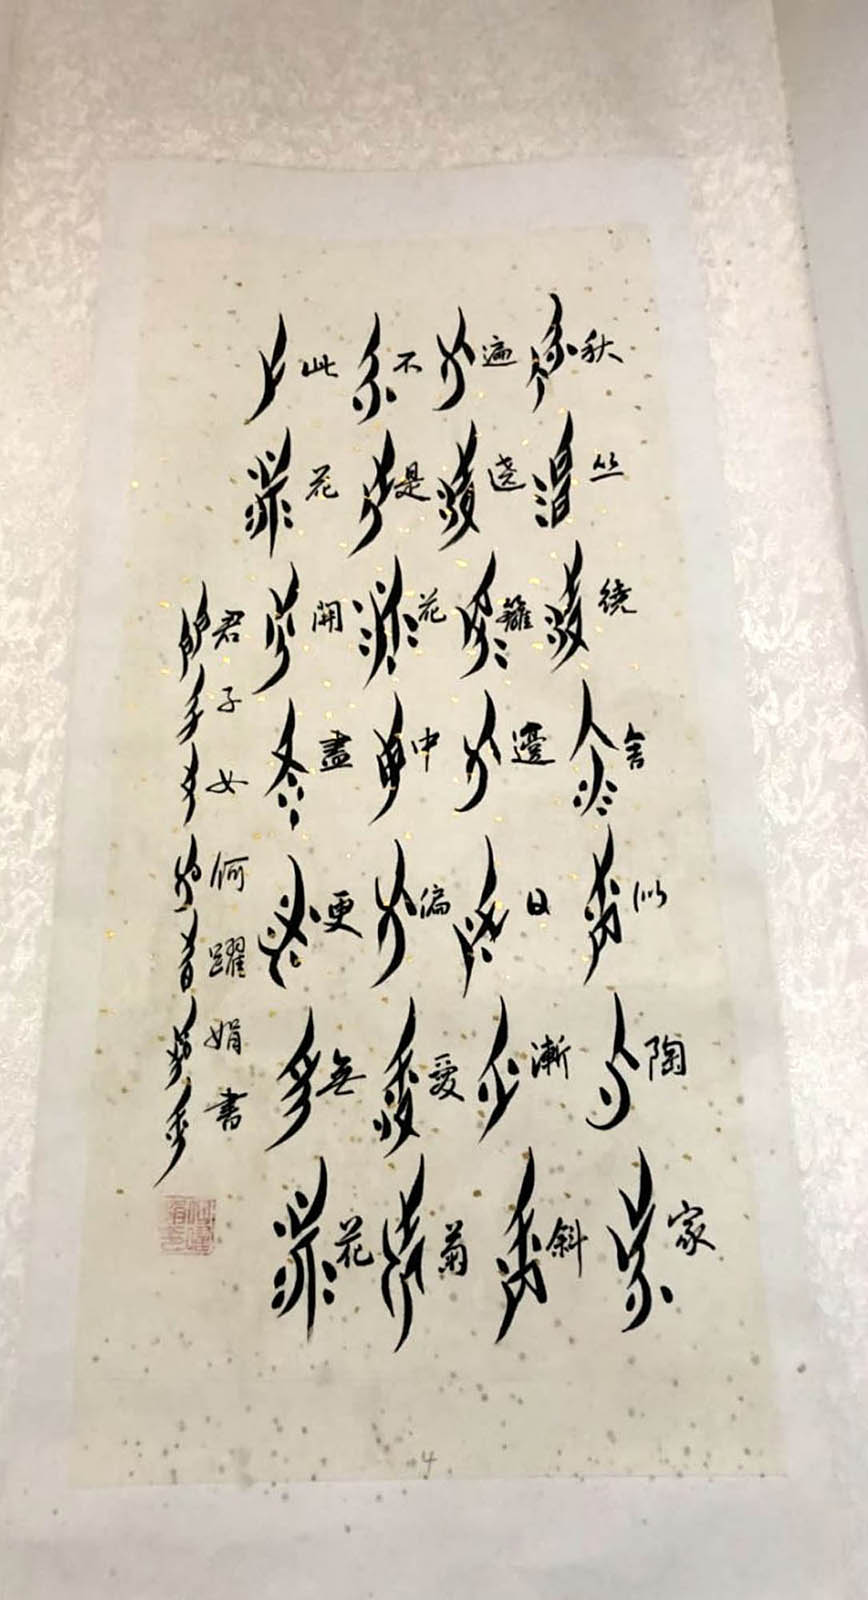 "Gentle women" poem calligraphy on a vertical scroll